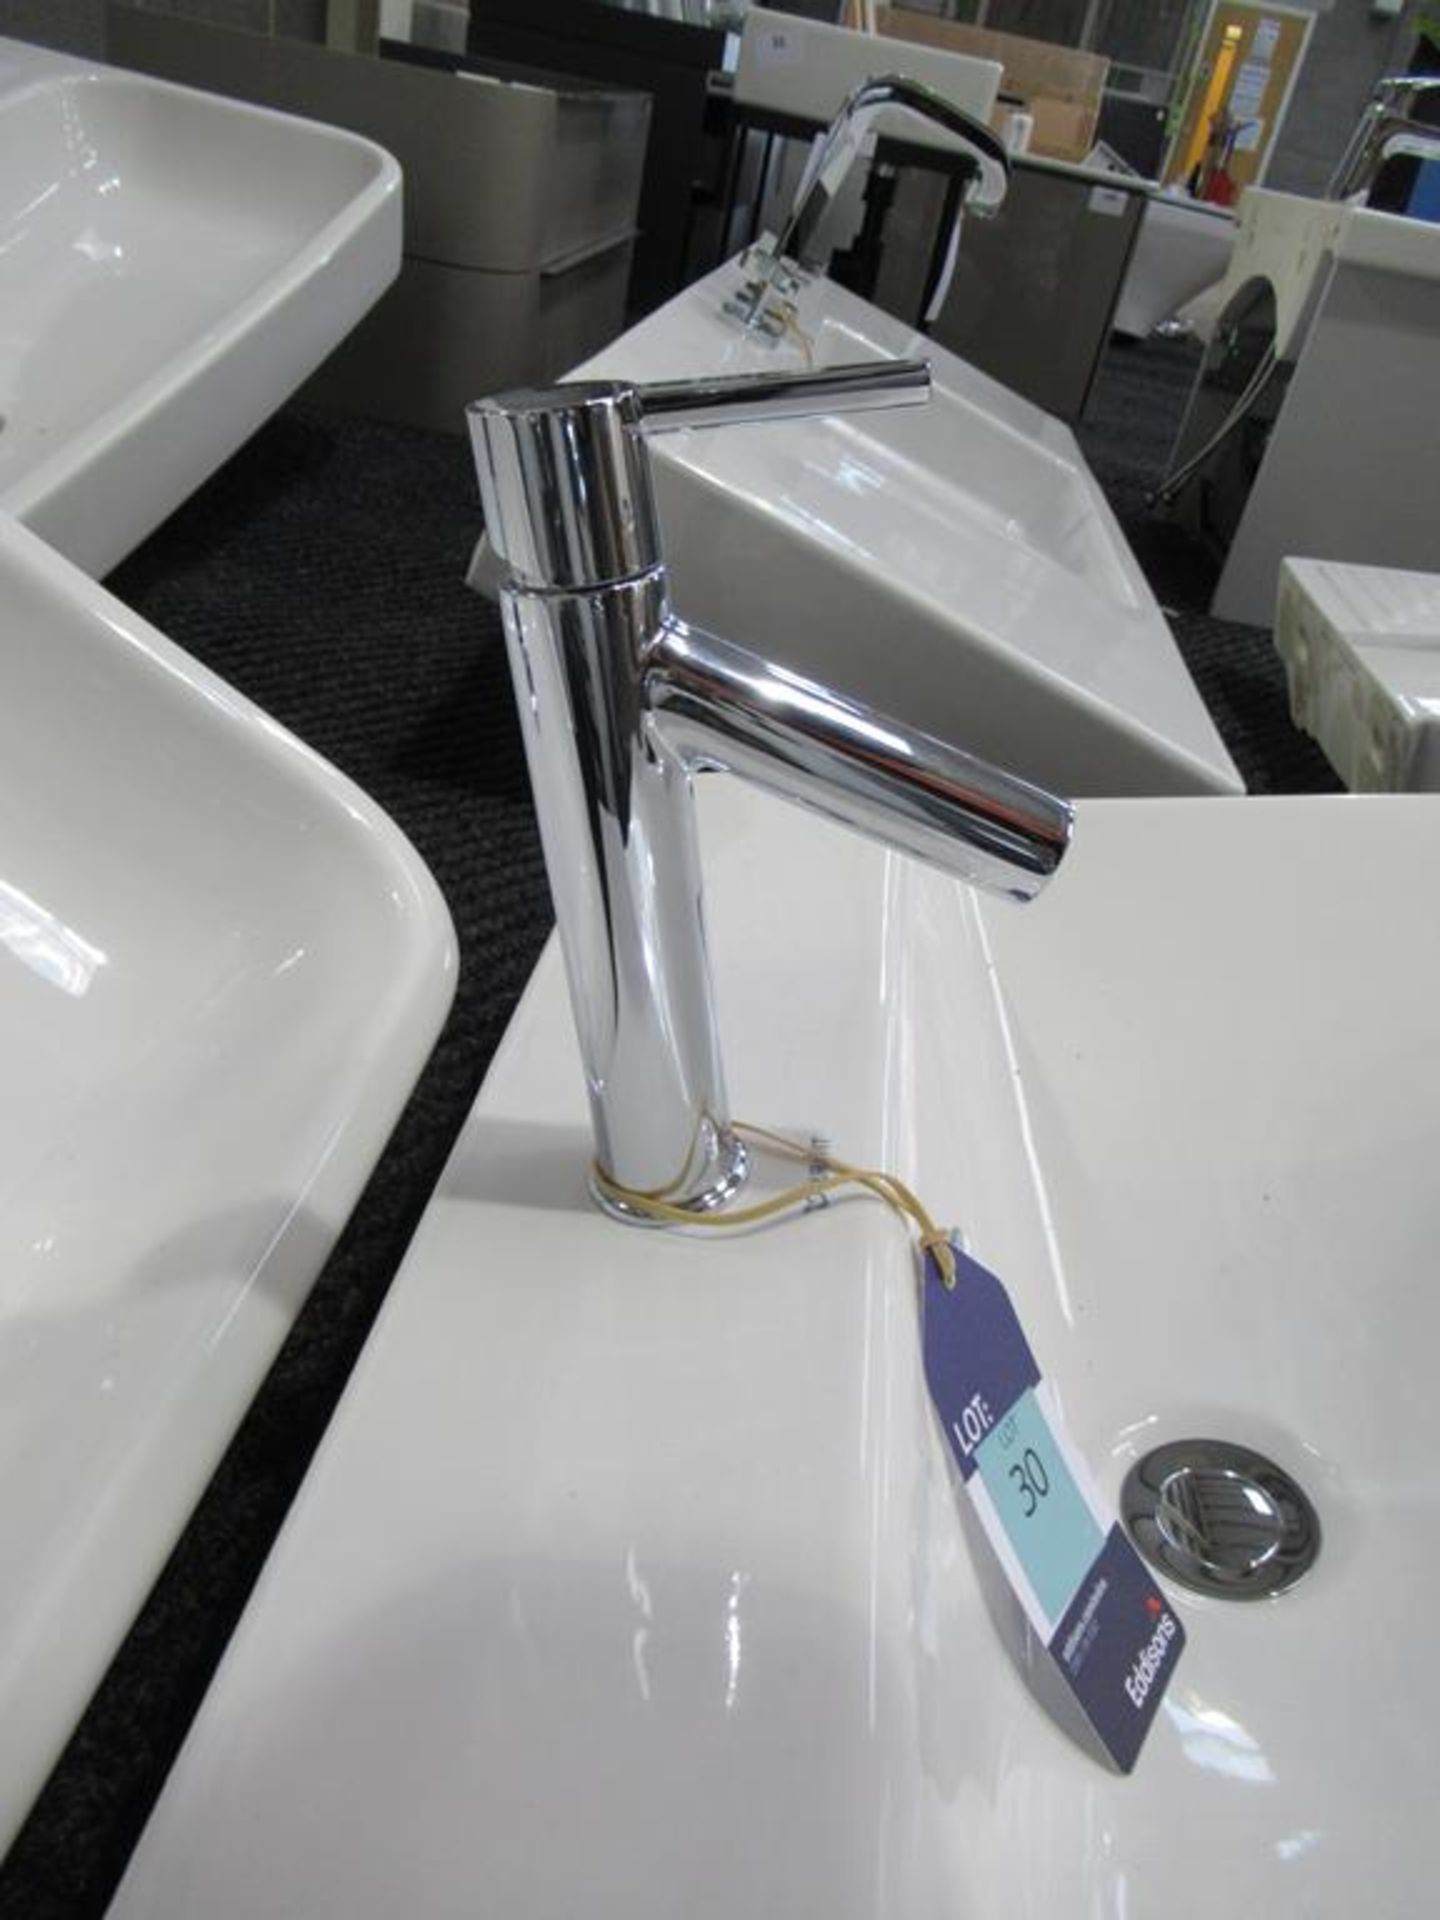 Ex Display Duravit P3 comforts Wash Basin 600mm with Starck single lever basin mixer. - Image 2 of 2